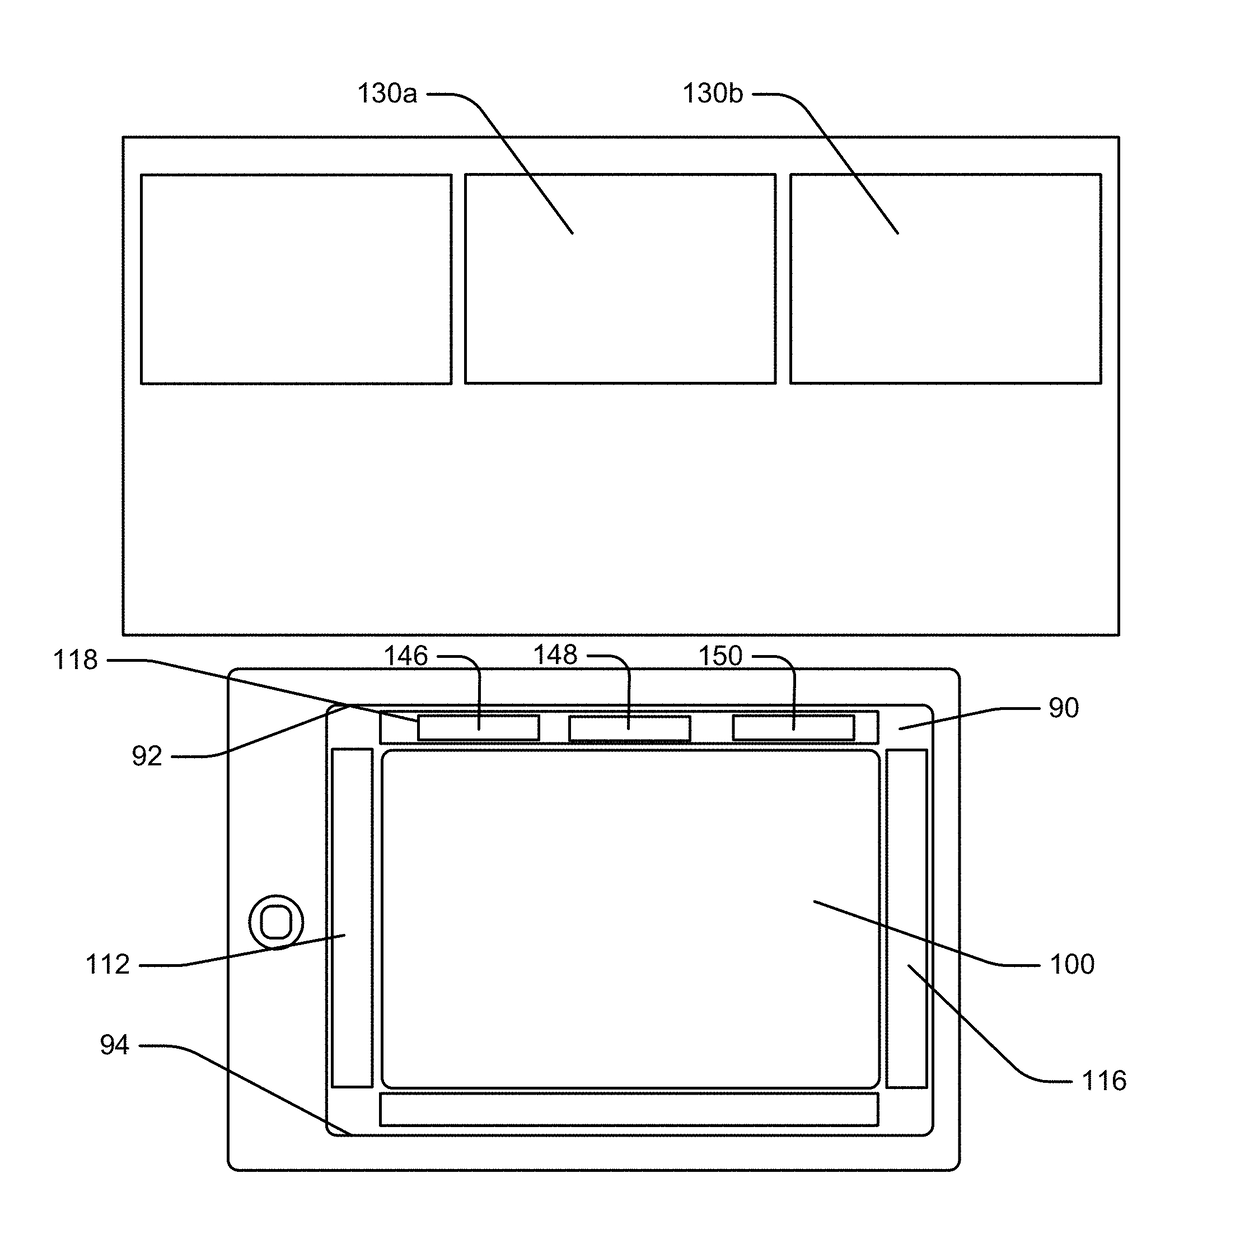 Emissive surfaces and workspaces method and apparatus